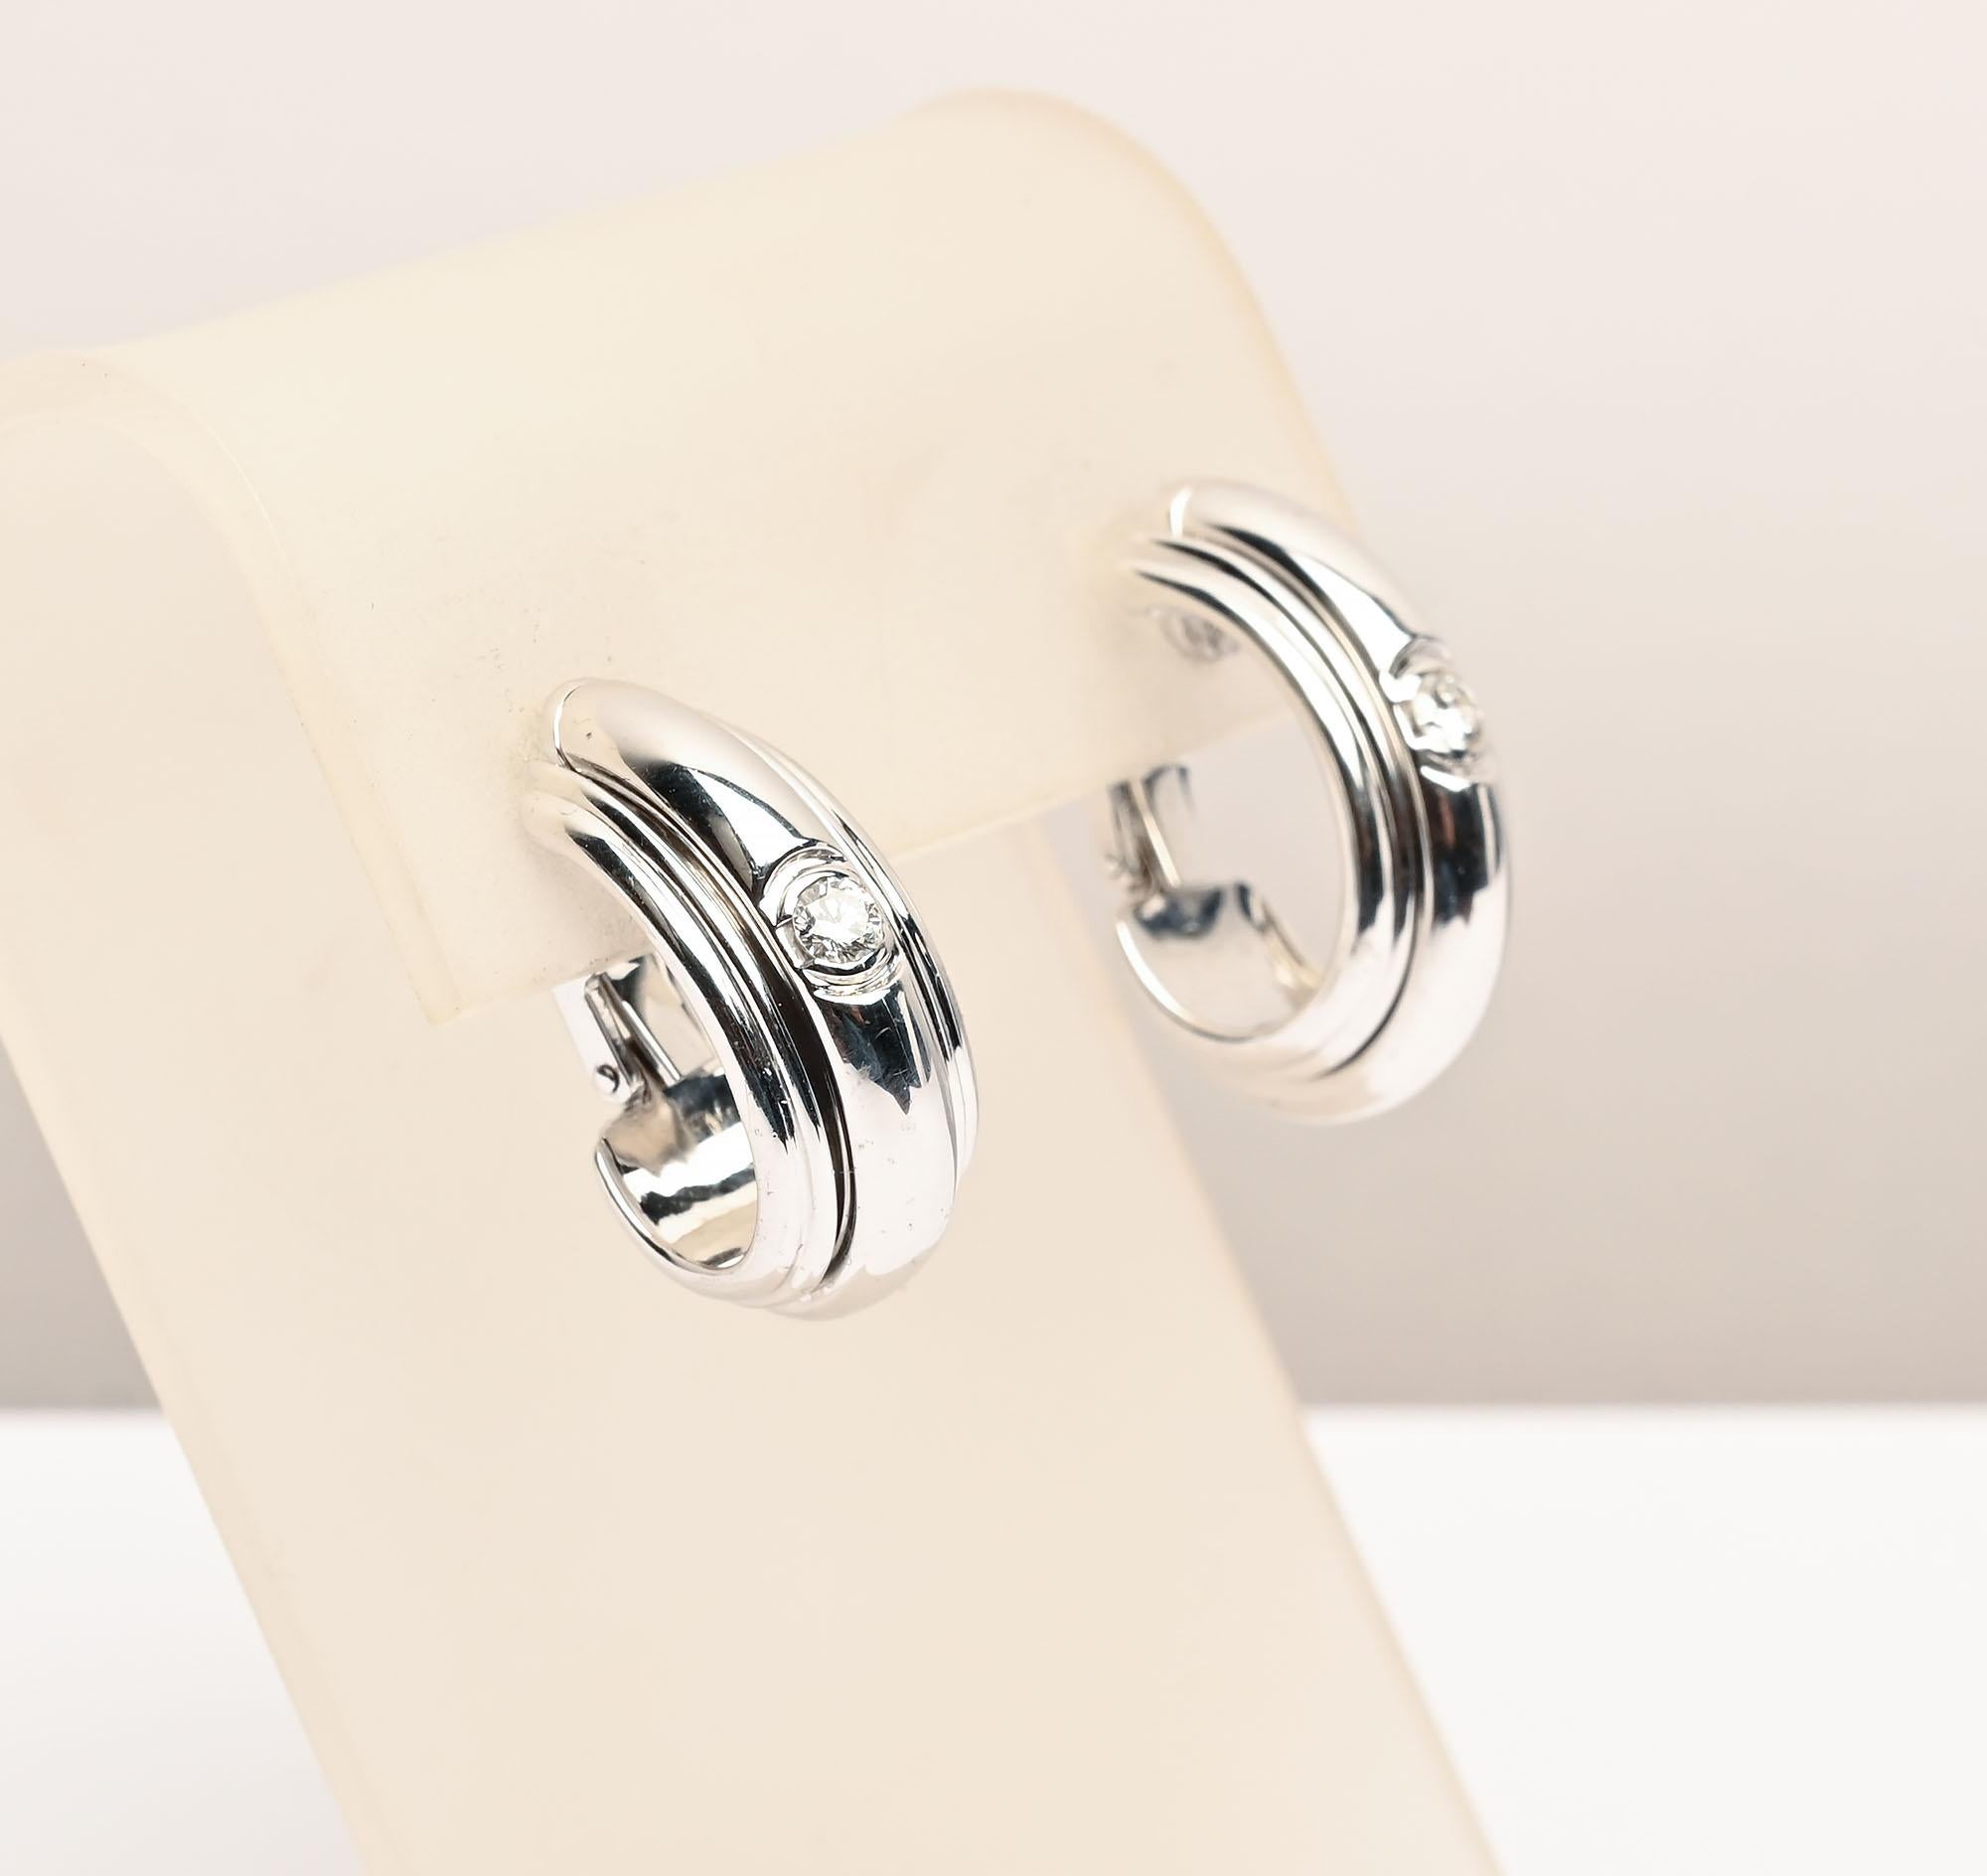 Piaget white gold 18 karat half hoop earrings with a .25 carat diamond in the middle of each. The diamonds are set in a raised band that intentionally can move. A double ribbed gold outlines the middle raised band. In all,  the earrings have a very